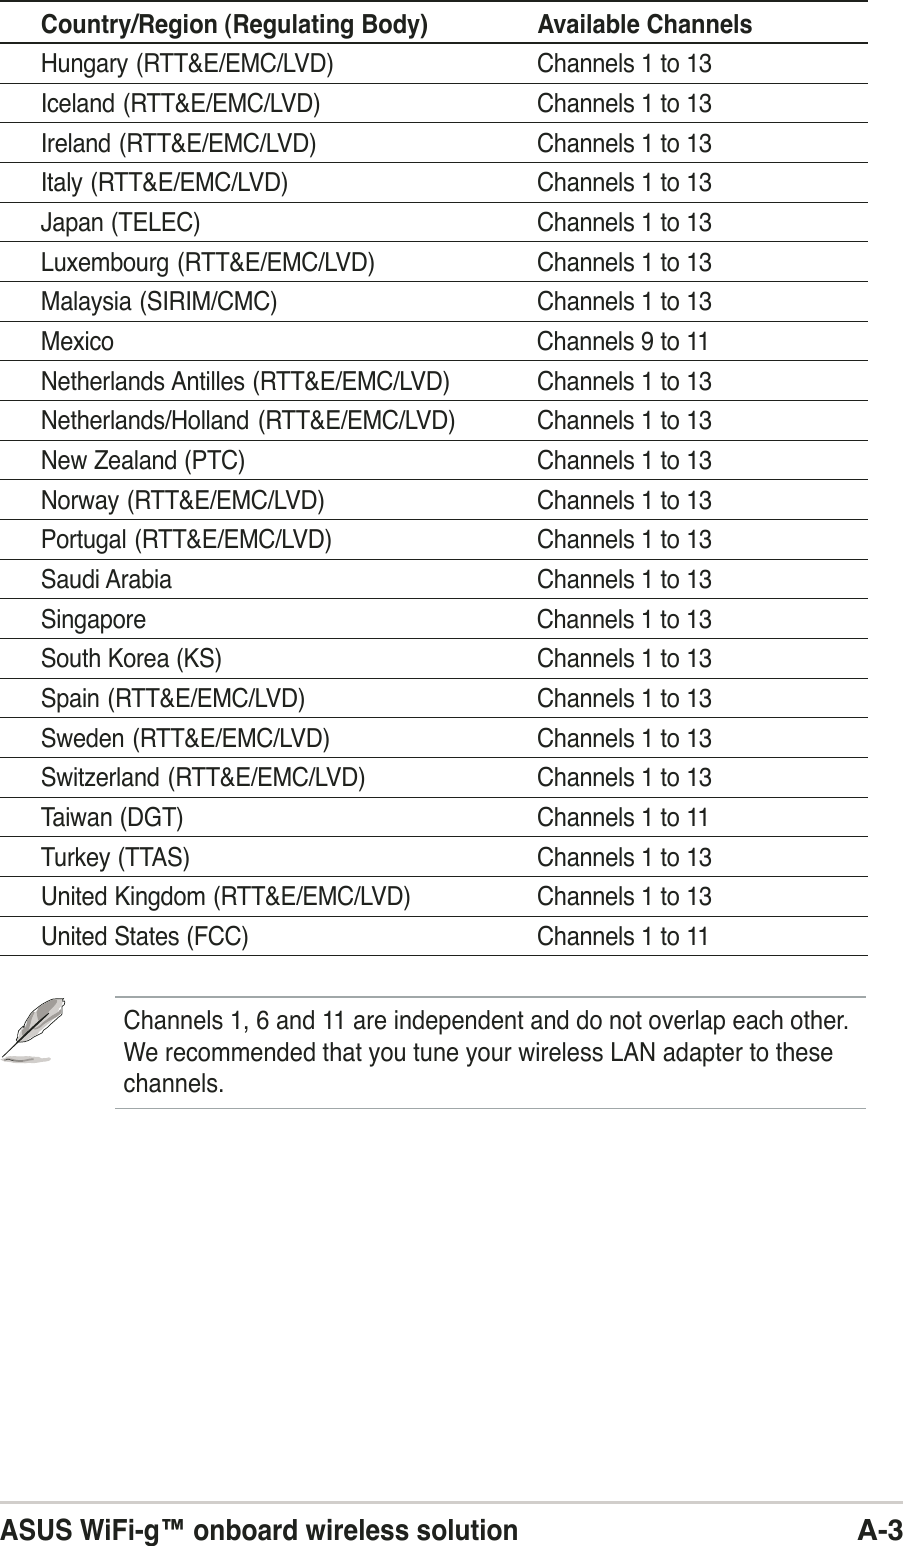 ASUS WiFi-g™ onboard wireless solutionA-3Country/Region (Regulating Body) Available ChannelsHungary (RTT&amp;E/EMC/LVD) Channels 1 to 13Iceland (RTT&amp;E/EMC/LVD) Channels 1 to 13Ireland (RTT&amp;E/EMC/LVD) Channels 1 to 13Italy (RTT&amp;E/EMC/LVD) Channels 1 to 13Japan (TELEC) Channels 1 to 13Luxembourg (RTT&amp;E/EMC/LVD) Channels 1 to 13Malaysia (SIRIM/CMC) Channels 1 to 13Mexico Channels 9 to 11Netherlands Antilles (RTT&amp;E/EMC/LVD) Channels 1 to 13Netherlands/Holland (RTT&amp;E/EMC/LVD) Channels 1 to 13New Zealand (PTC) Channels 1 to 13Norway (RTT&amp;E/EMC/LVD) Channels 1 to 13Portugal (RTT&amp;E/EMC/LVD) Channels 1 to 13Saudi Arabia Channels 1 to 13Singapore Channels 1 to 13South Korea (KS) Channels 1 to 13Spain (RTT&amp;E/EMC/LVD) Channels 1 to 13Sweden (RTT&amp;E/EMC/LVD) Channels 1 to 13Switzerland (RTT&amp;E/EMC/LVD) Channels 1 to 13Taiwan (DGT) Channels 1 to 11Turkey (TTAS) Channels 1 to 13United Kingdom (RTT&amp;E/EMC/LVD) Channels 1 to 13United States (FCC) Channels 1 to 11Channels 1, 6 and 11 are independent and do not overlap each other.We recommended that you tune your wireless LAN adapter to thesechannels.